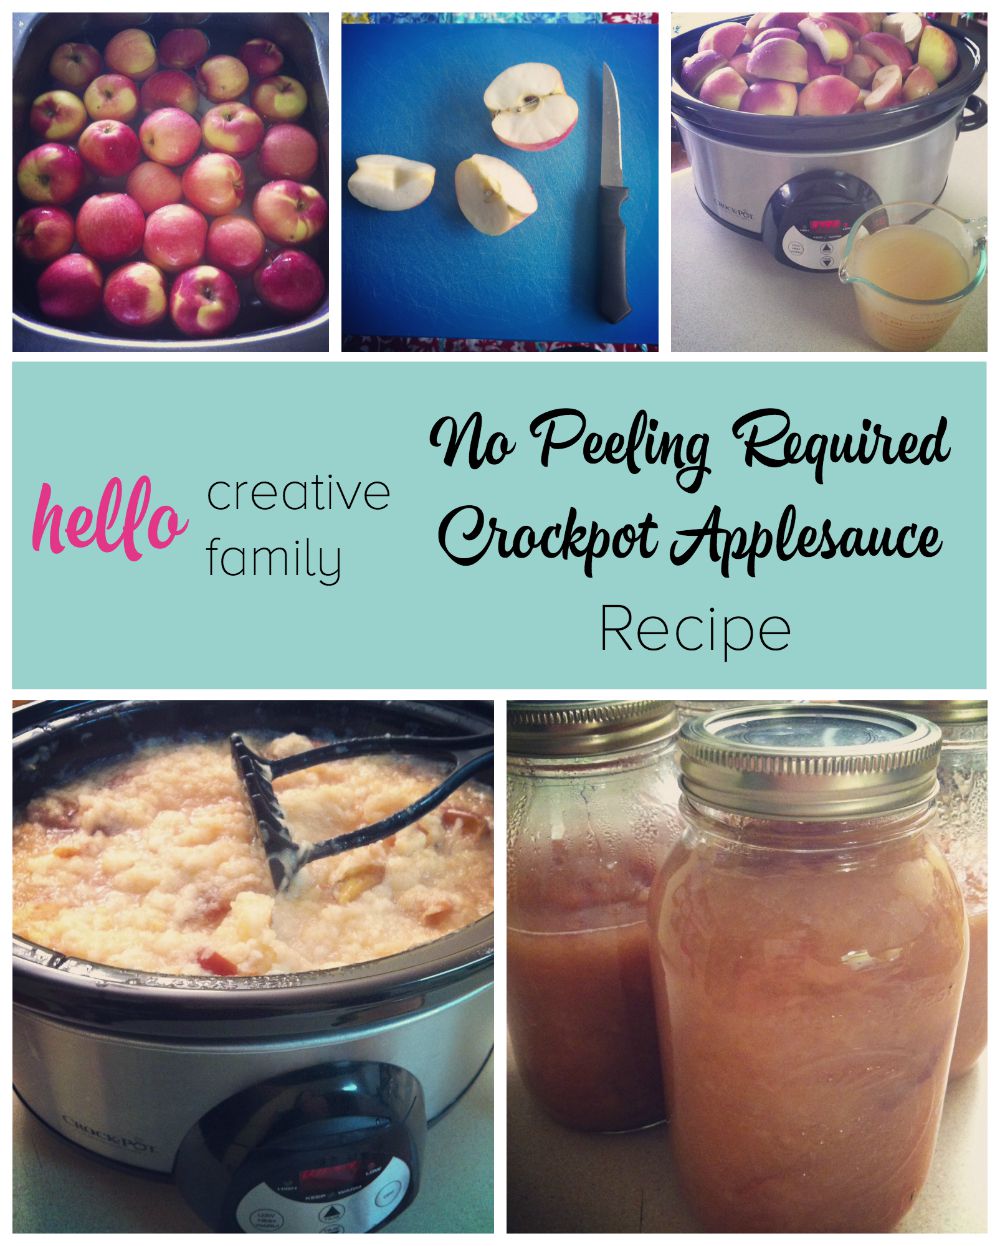 Everyone knows the worst part of making applesauce is peeling the apples. Not with this recipe! No Peeling Required Crockpot Applesauce Recipe